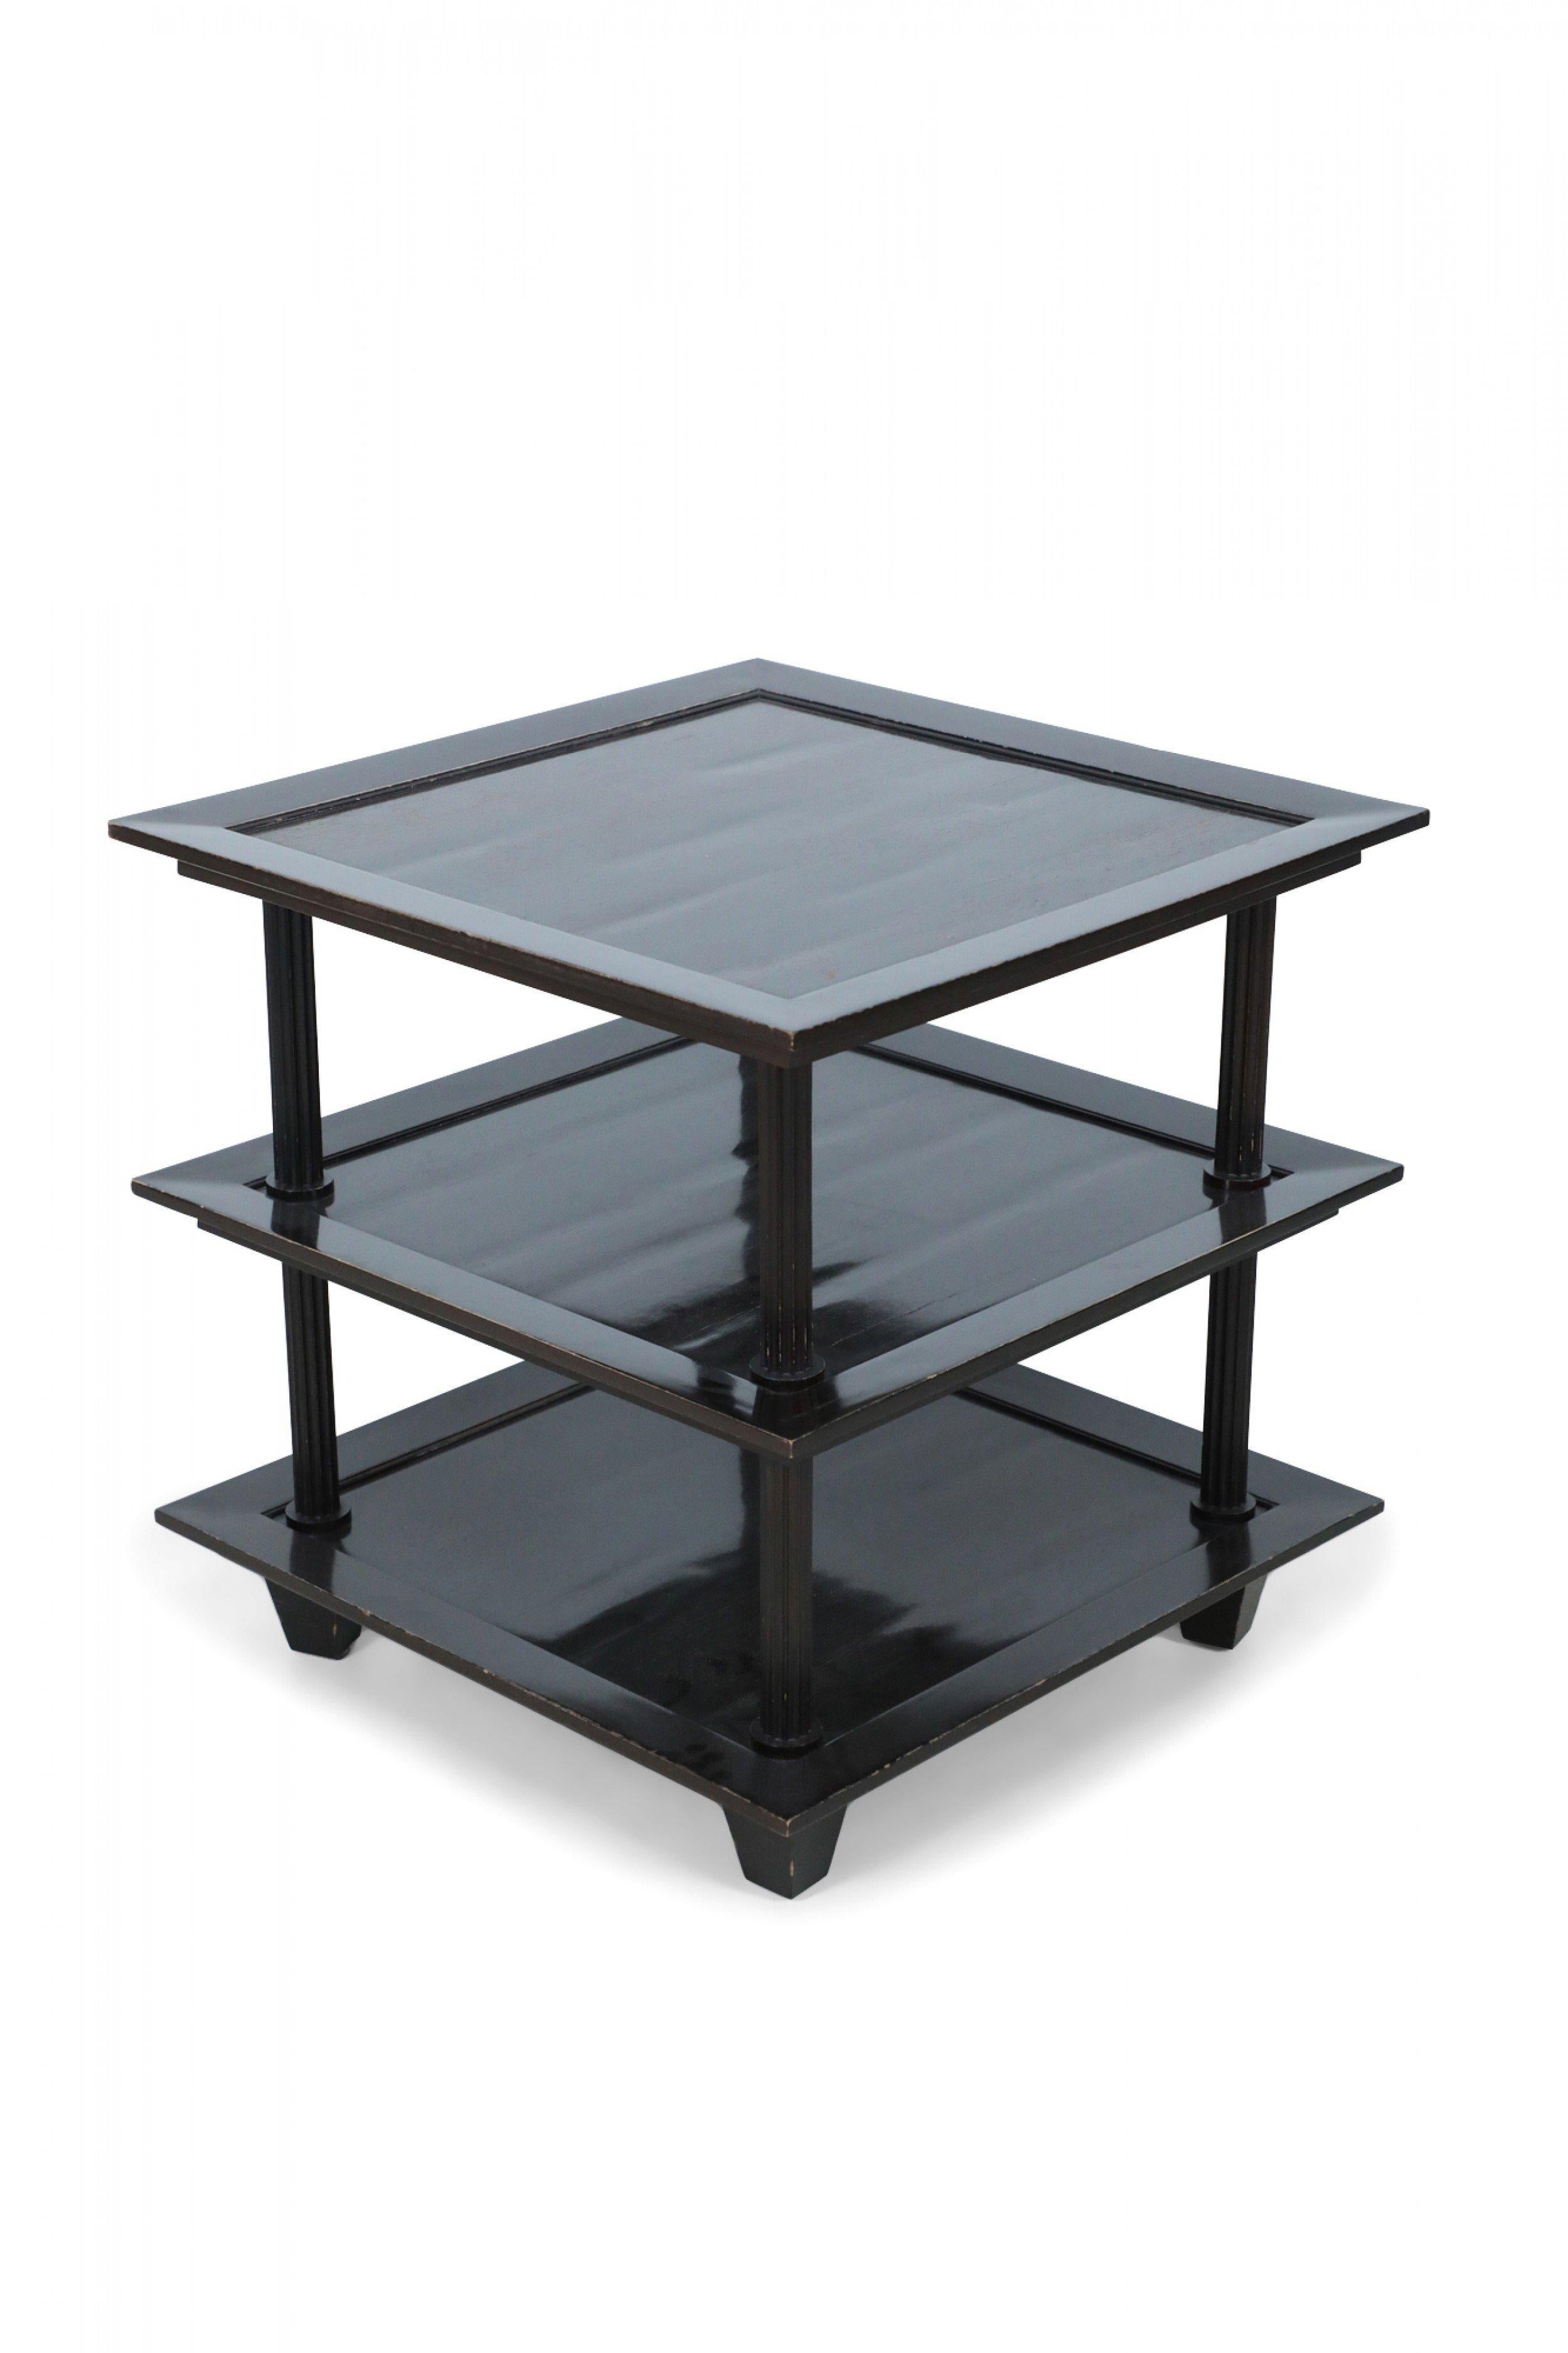 Painted Barbara Barry Contemporary American Three Tiered Mahogany Table For Sale